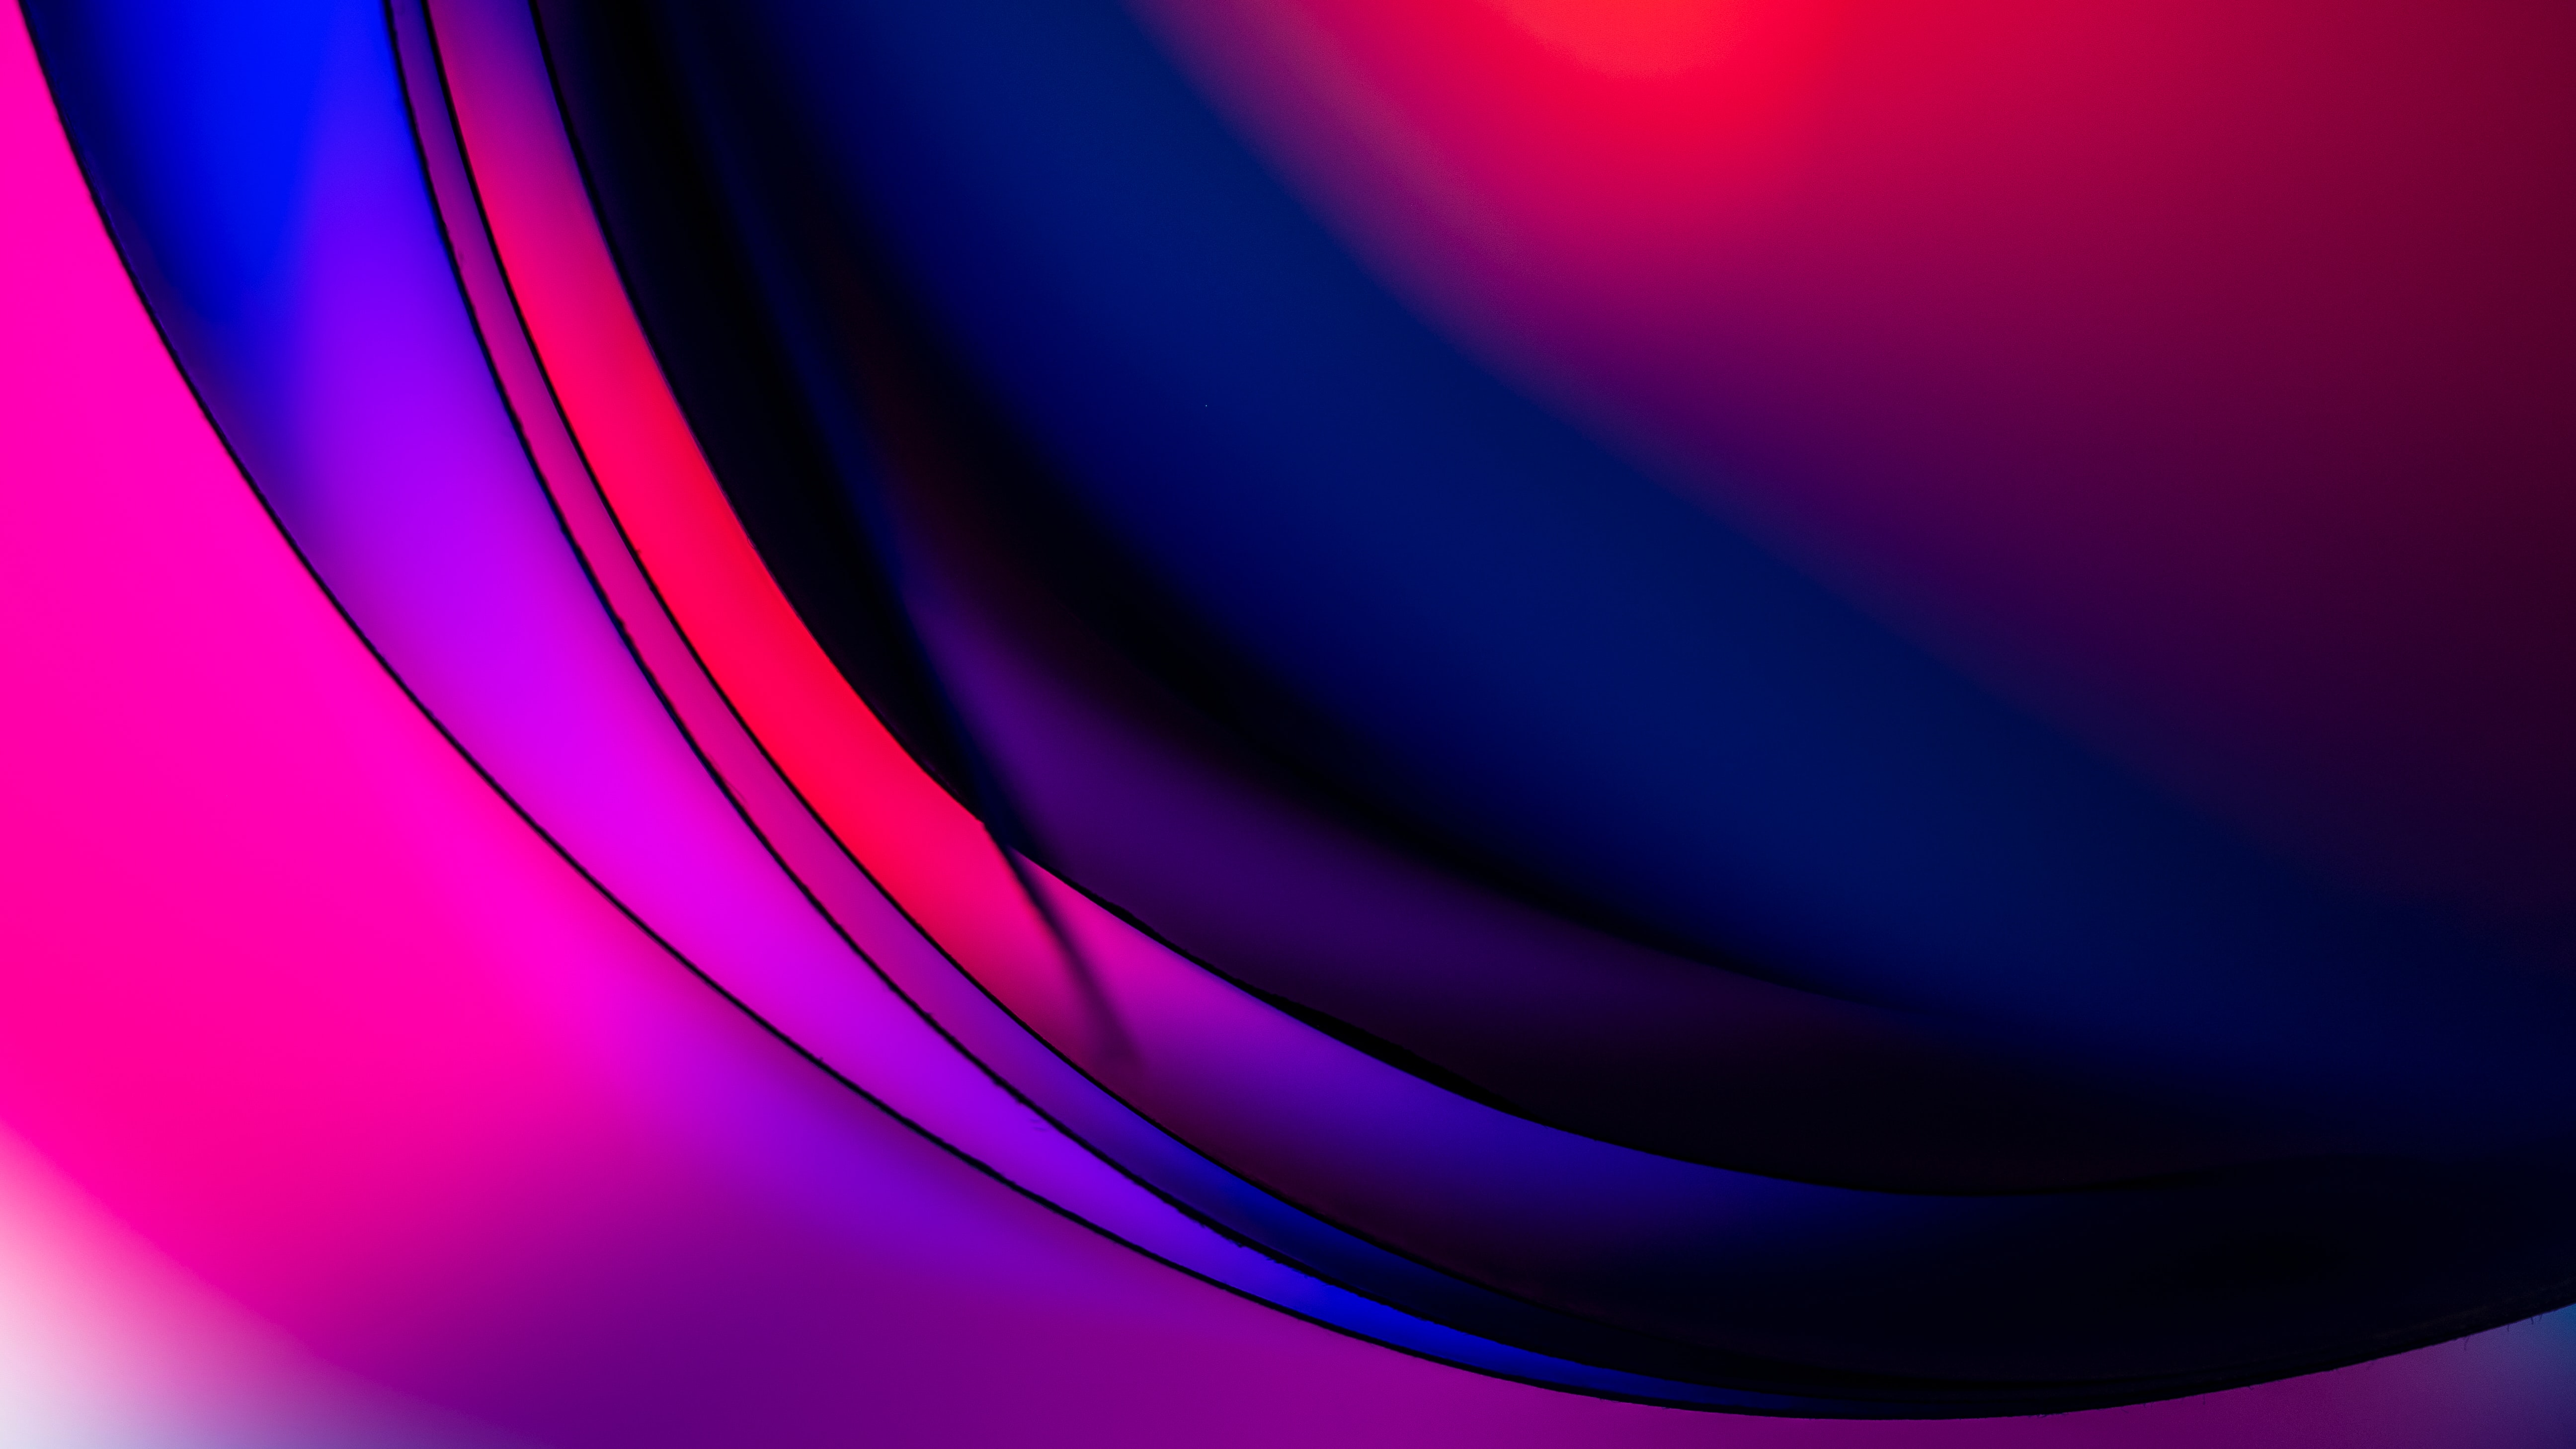 streaks, lines, gradient, abstract, pink, blue, stripes for android